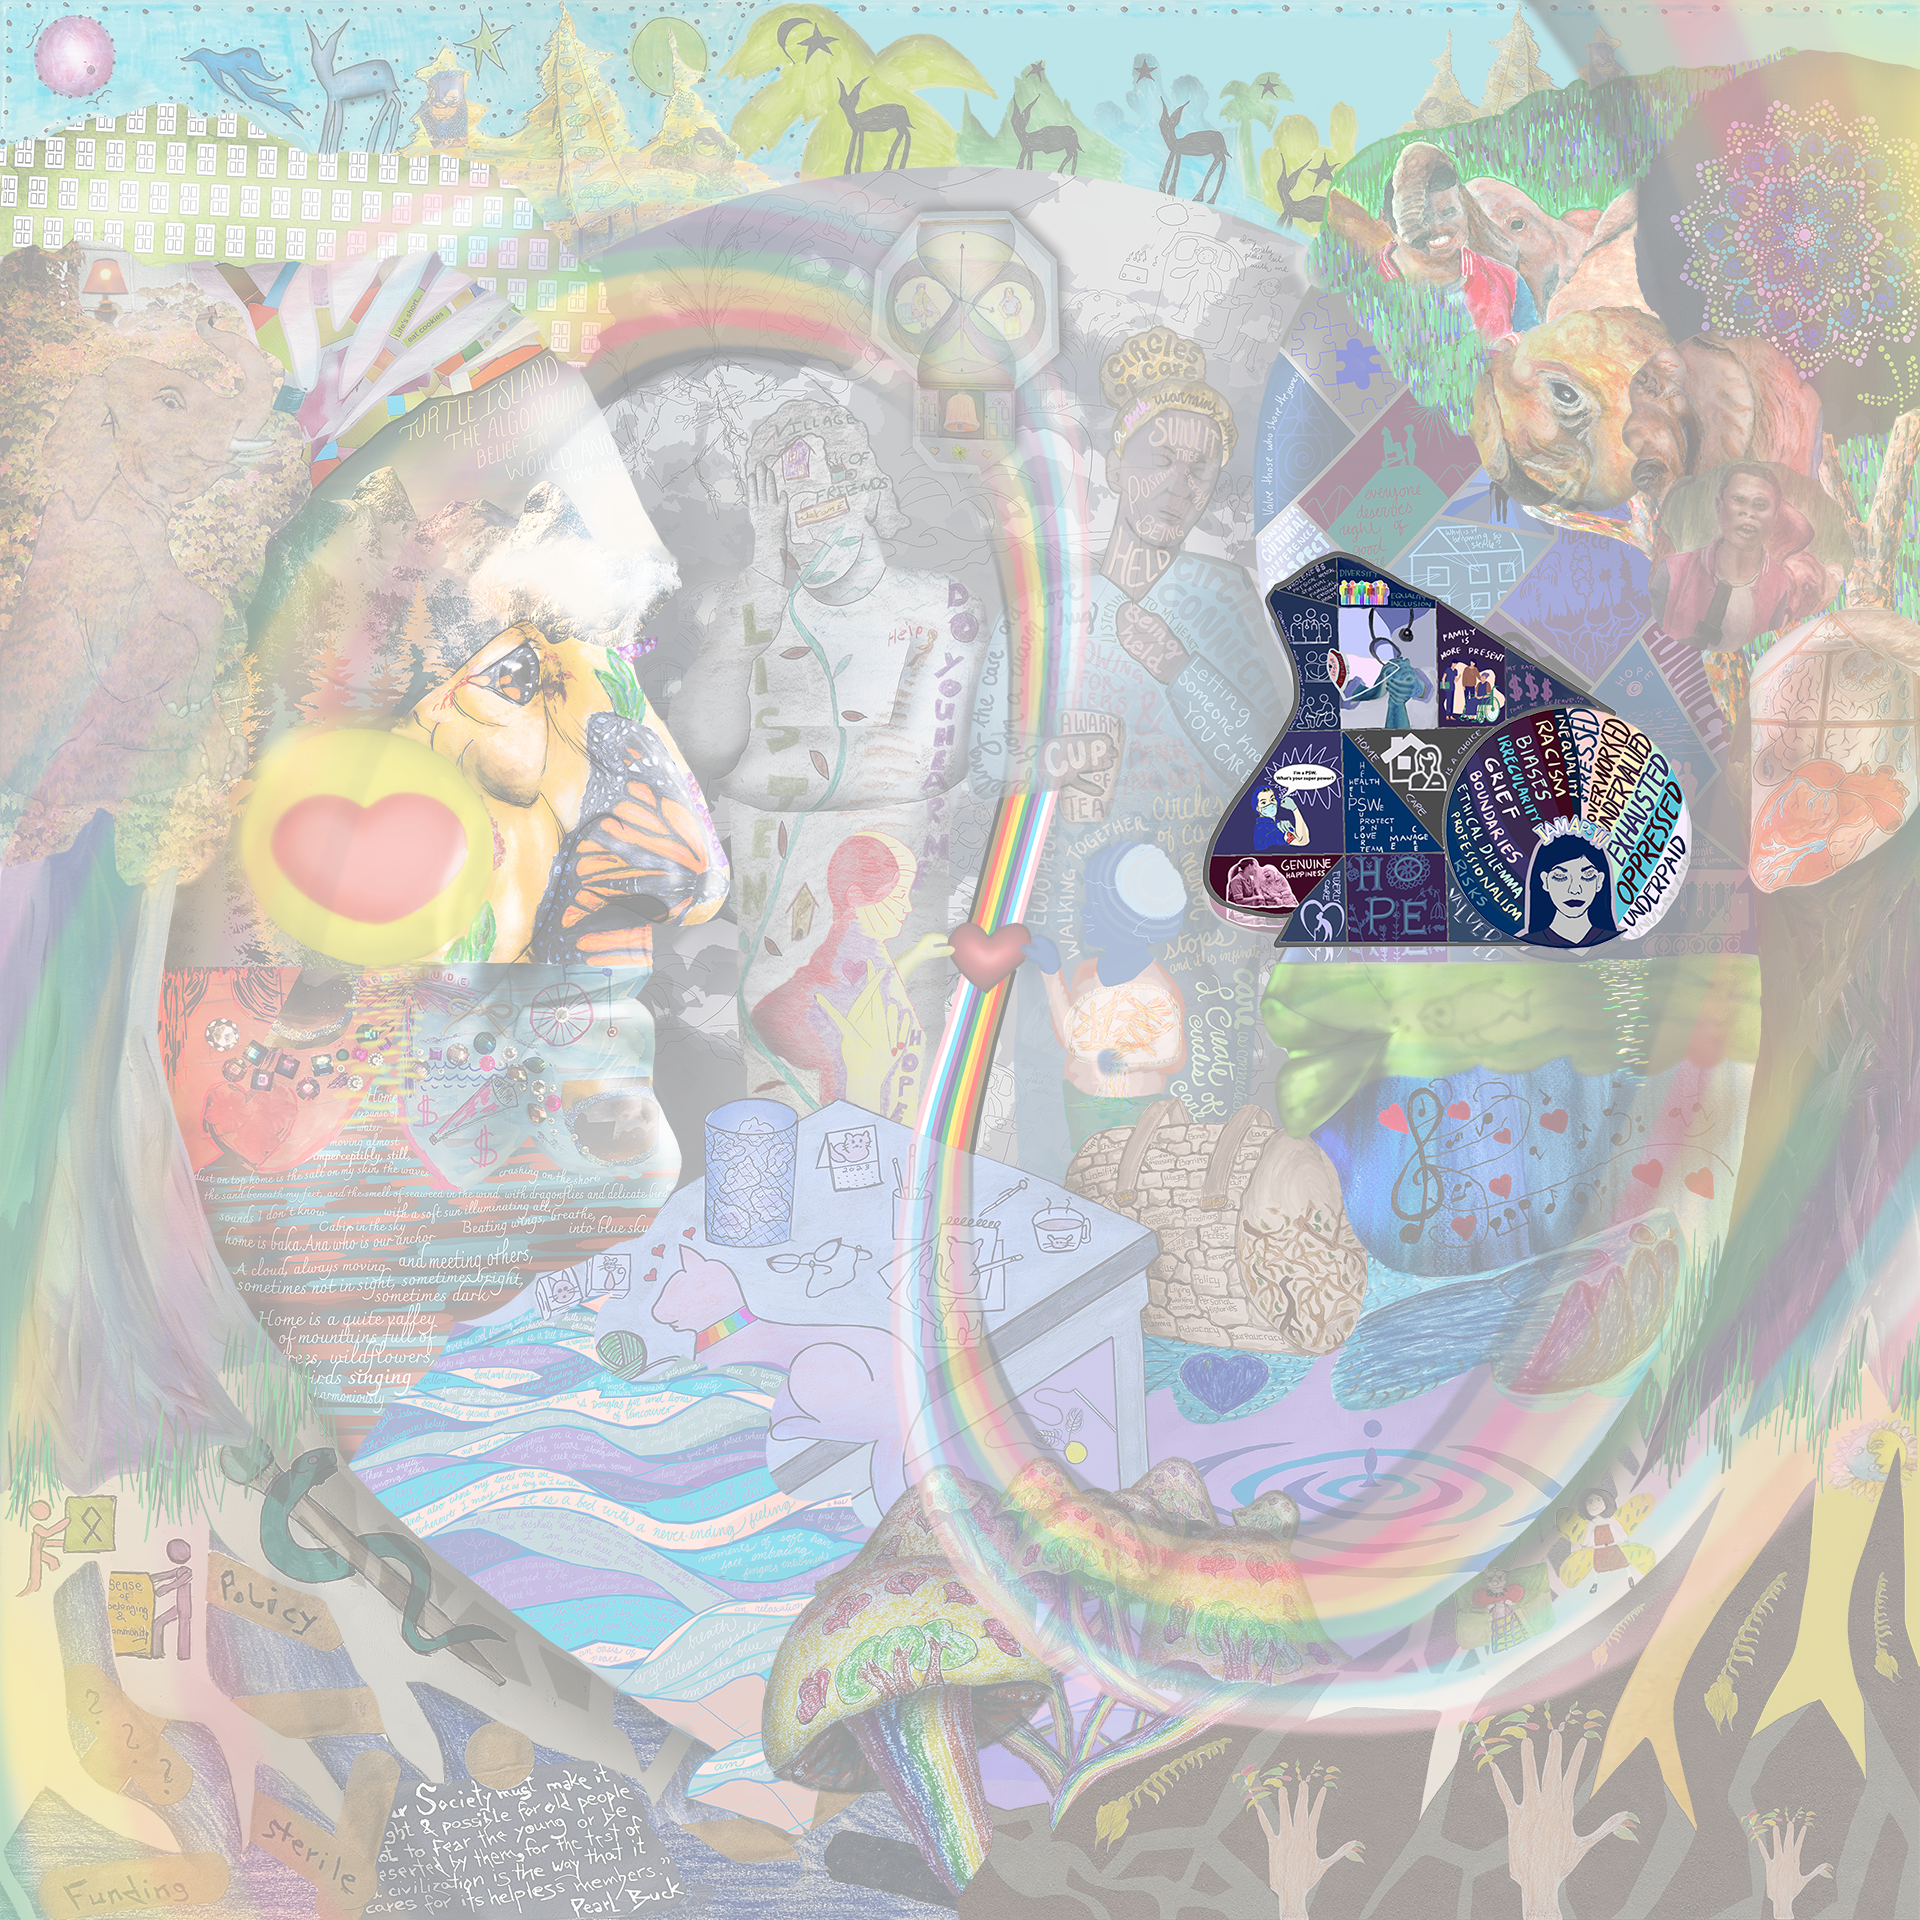 This layer depicts Michelle's artwork. It shows a PSW with their head surrounded by words related to personal support worker work and segments of art with text and smaller images on the nose, eye, and side of face of the profile-view figure on the right of the image.  